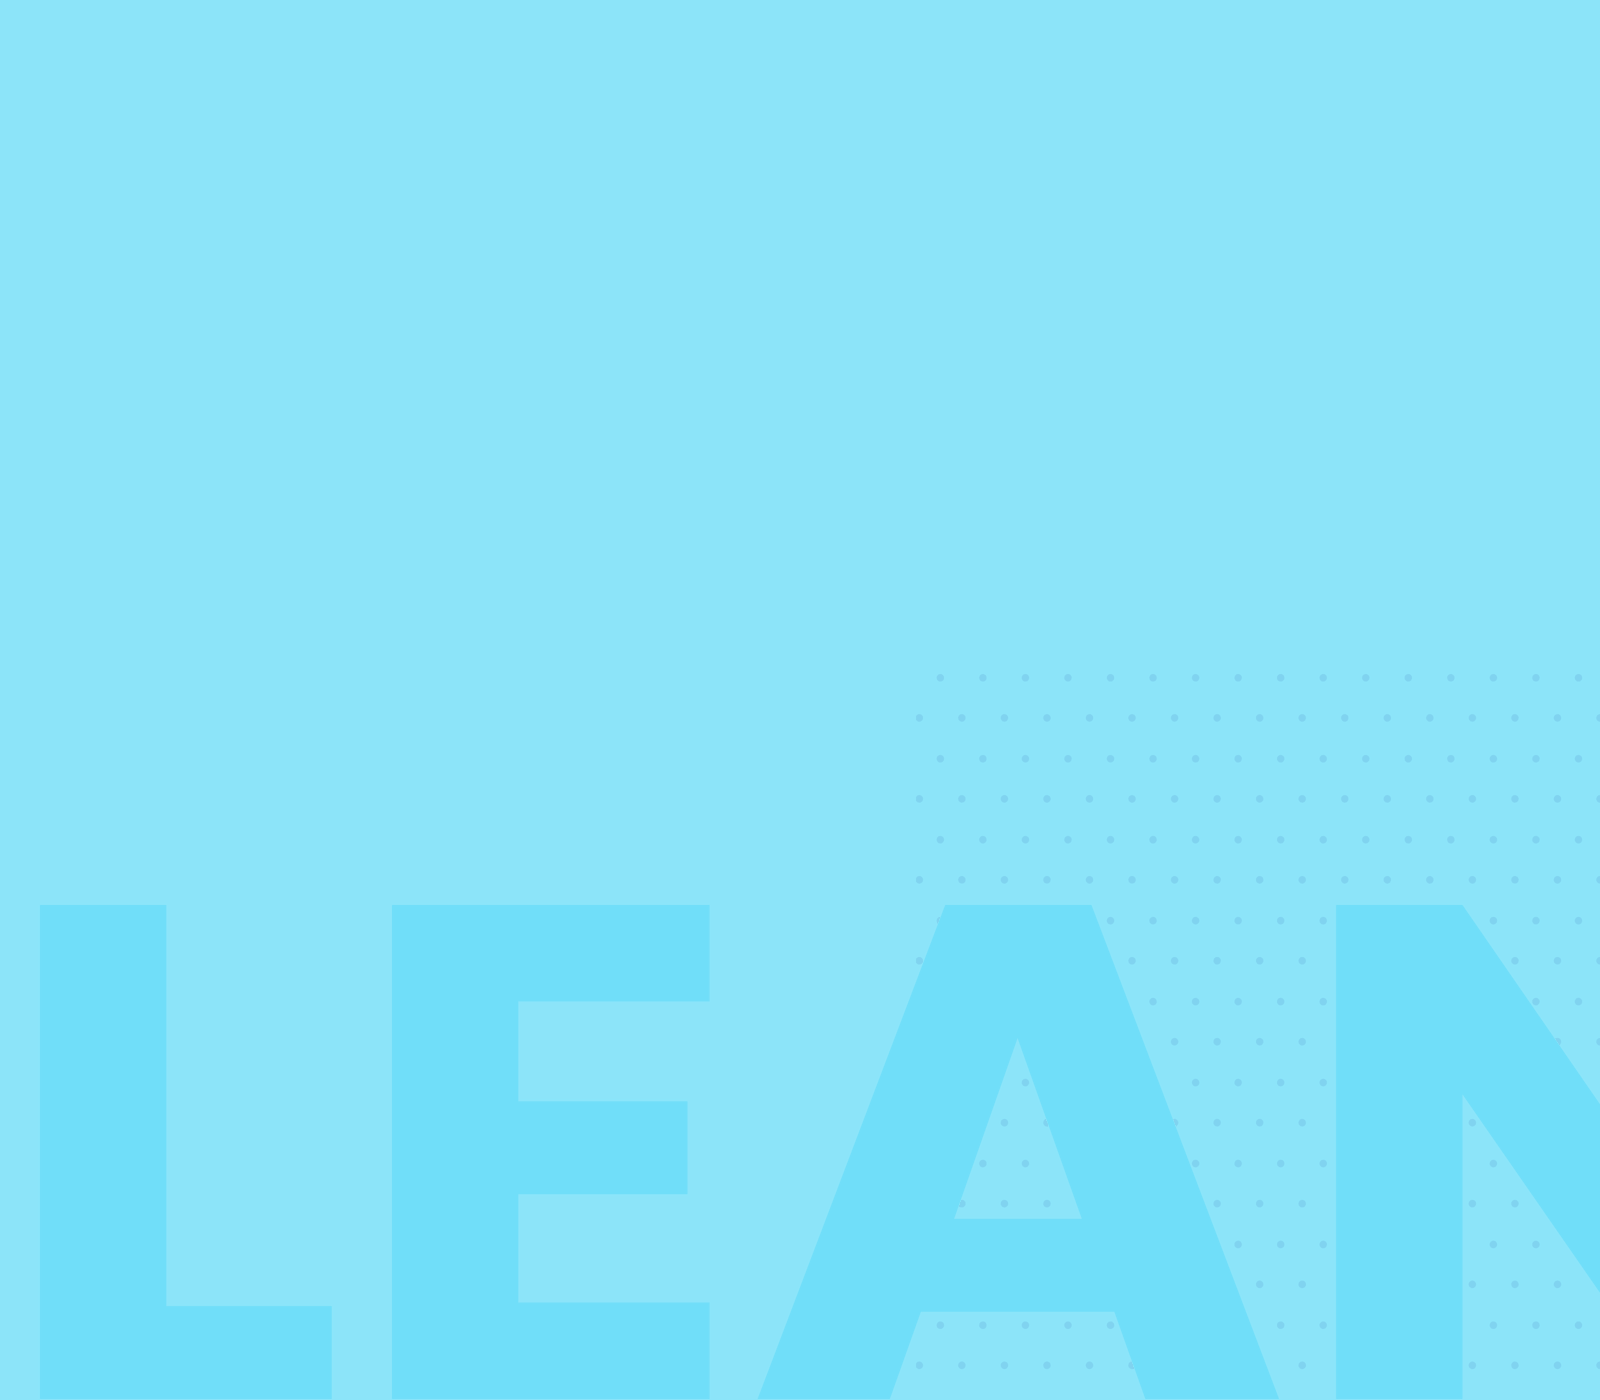 The outsourced growth team at Lean Labs delivers growth marketing solutions that drive 10X organic growth to your company, guaranteed.